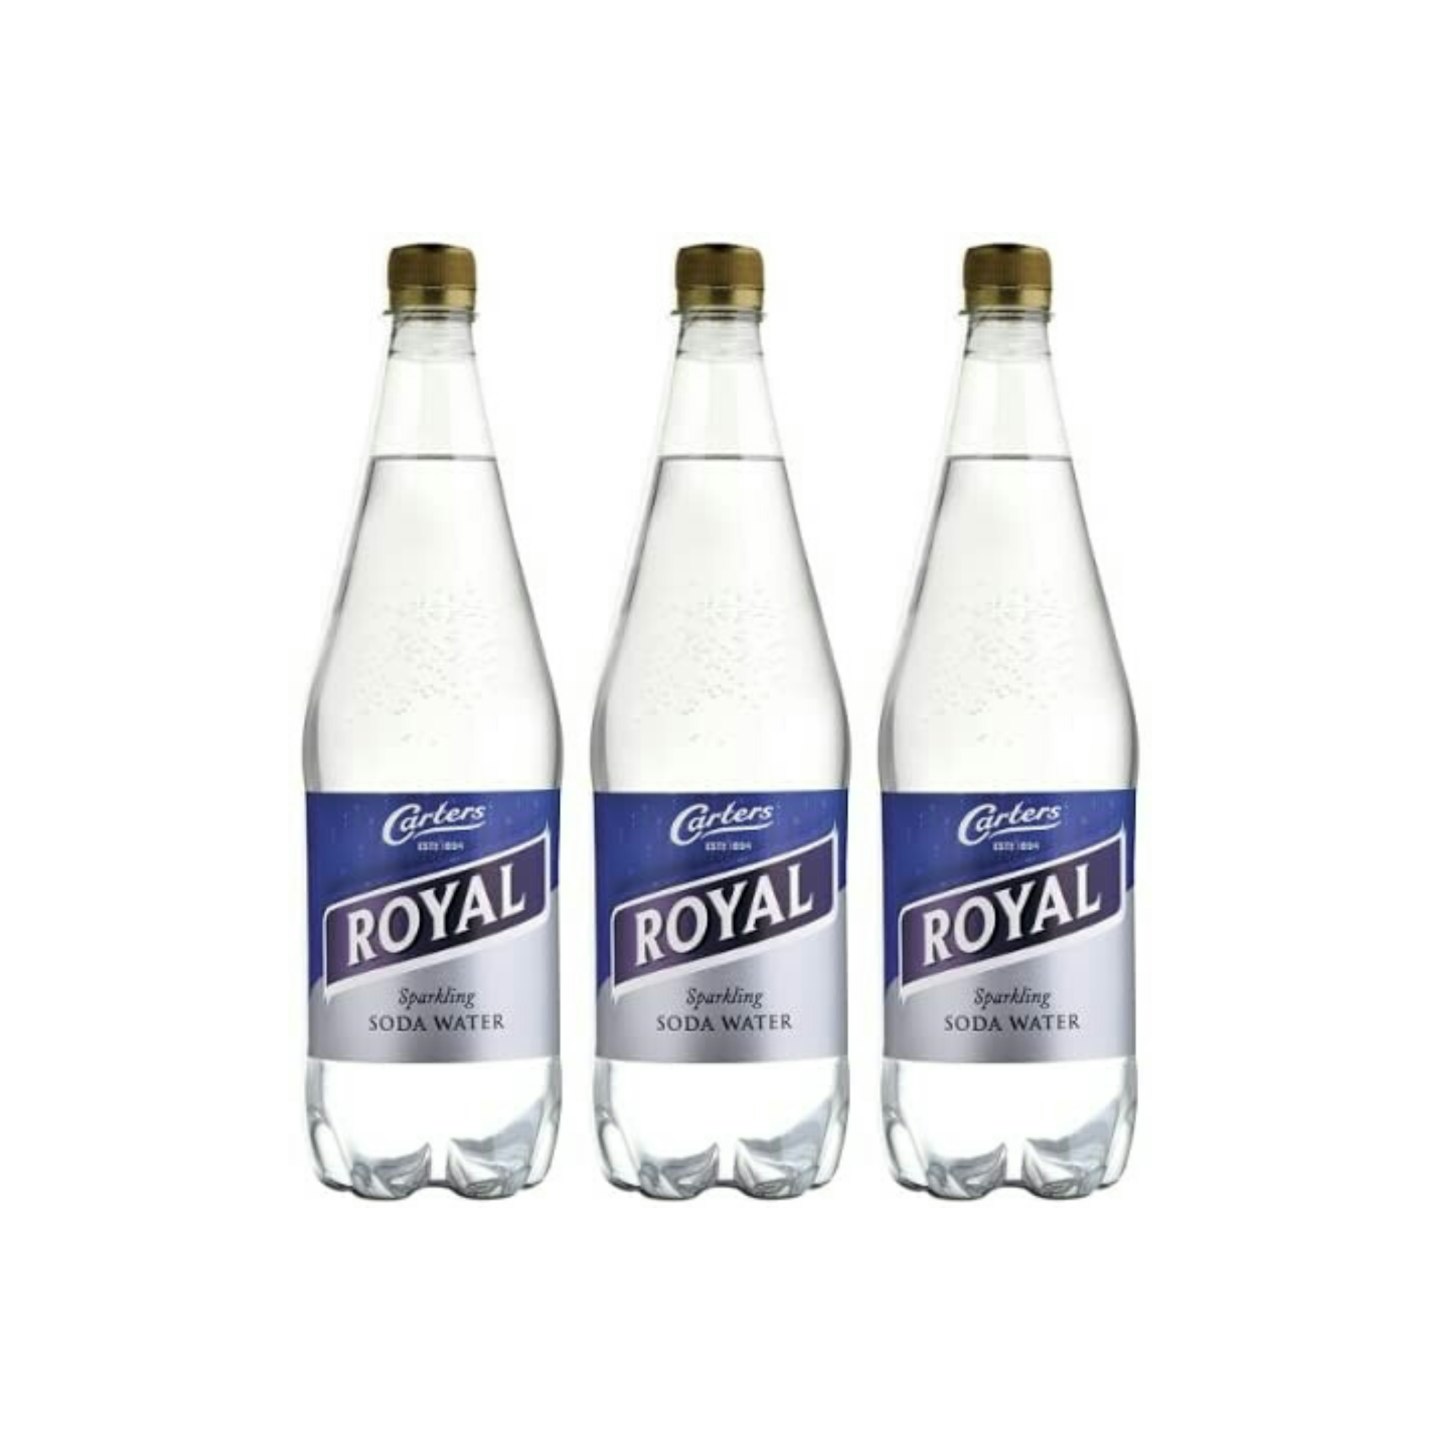 Carters Royal Sparkling Soda Water 1 Litre, Pack of 6